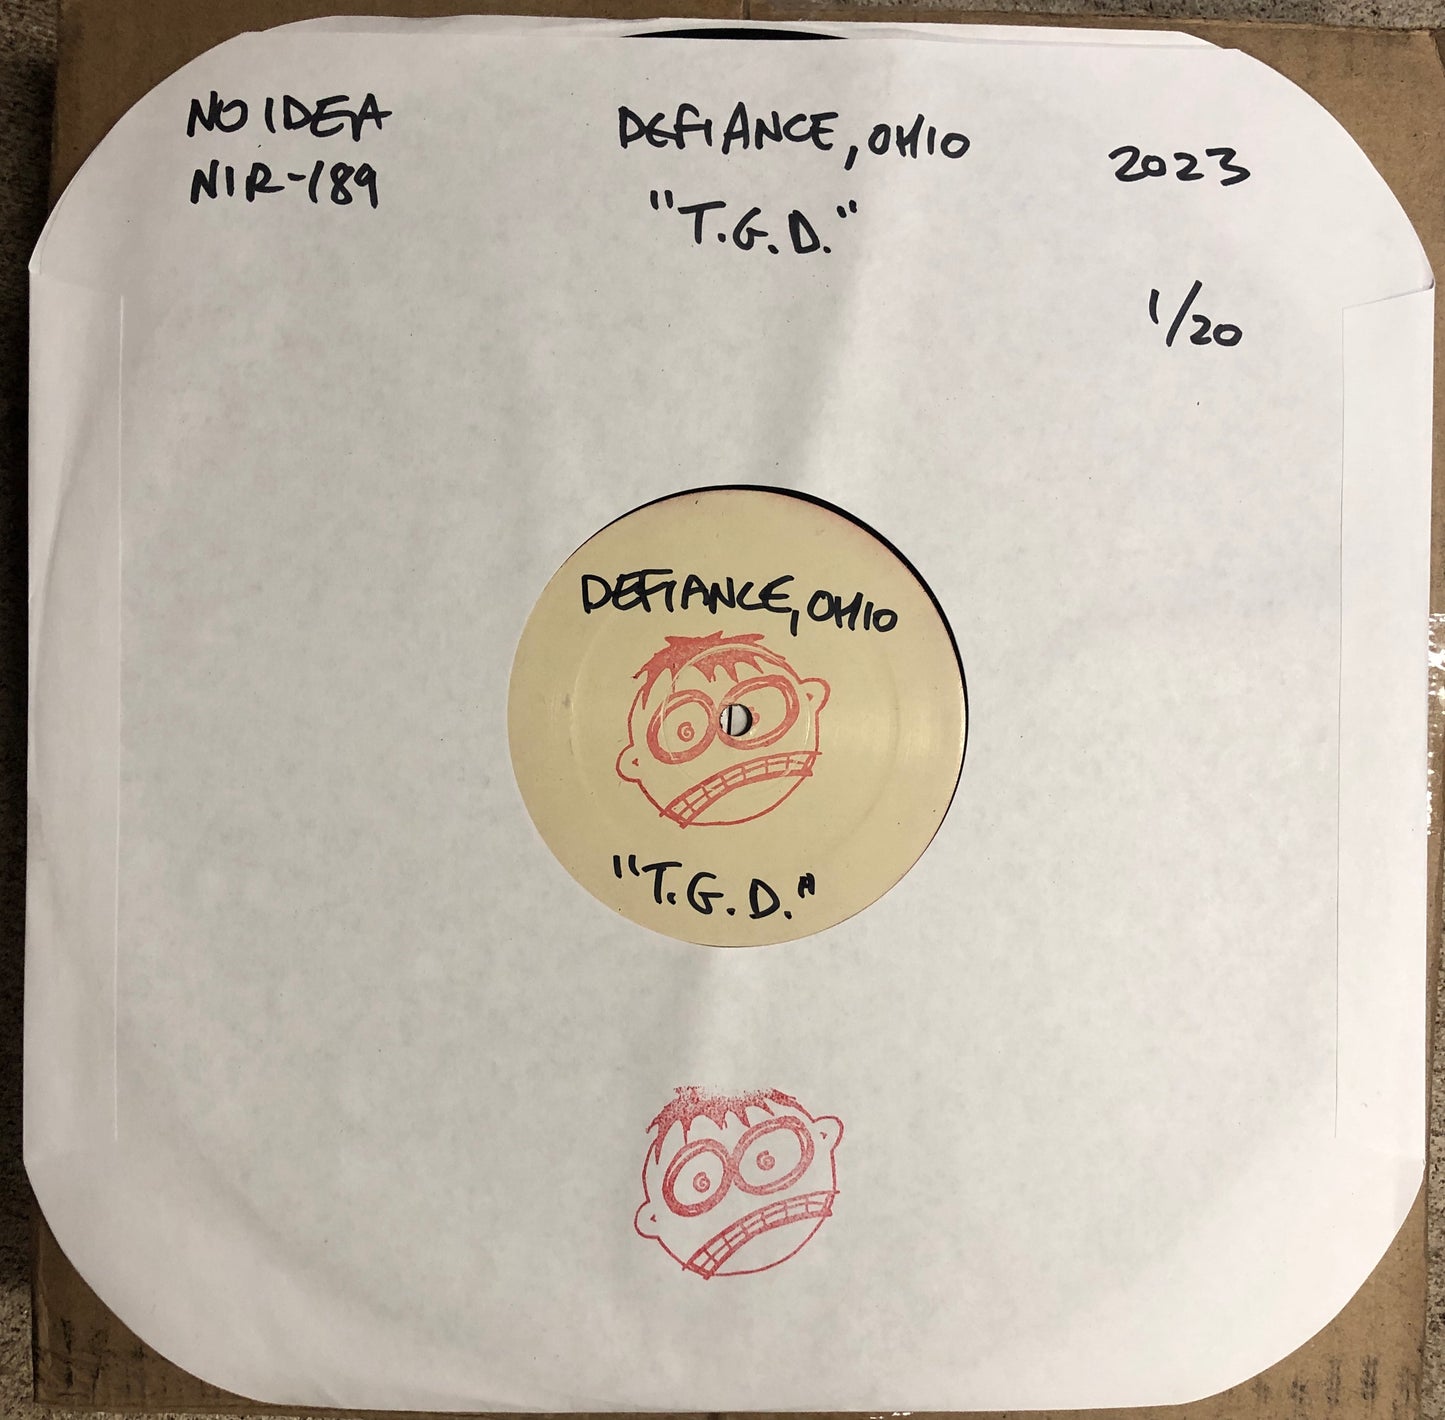 DEFIANCE, OHIO "The Great Depression" TEST PRESSING